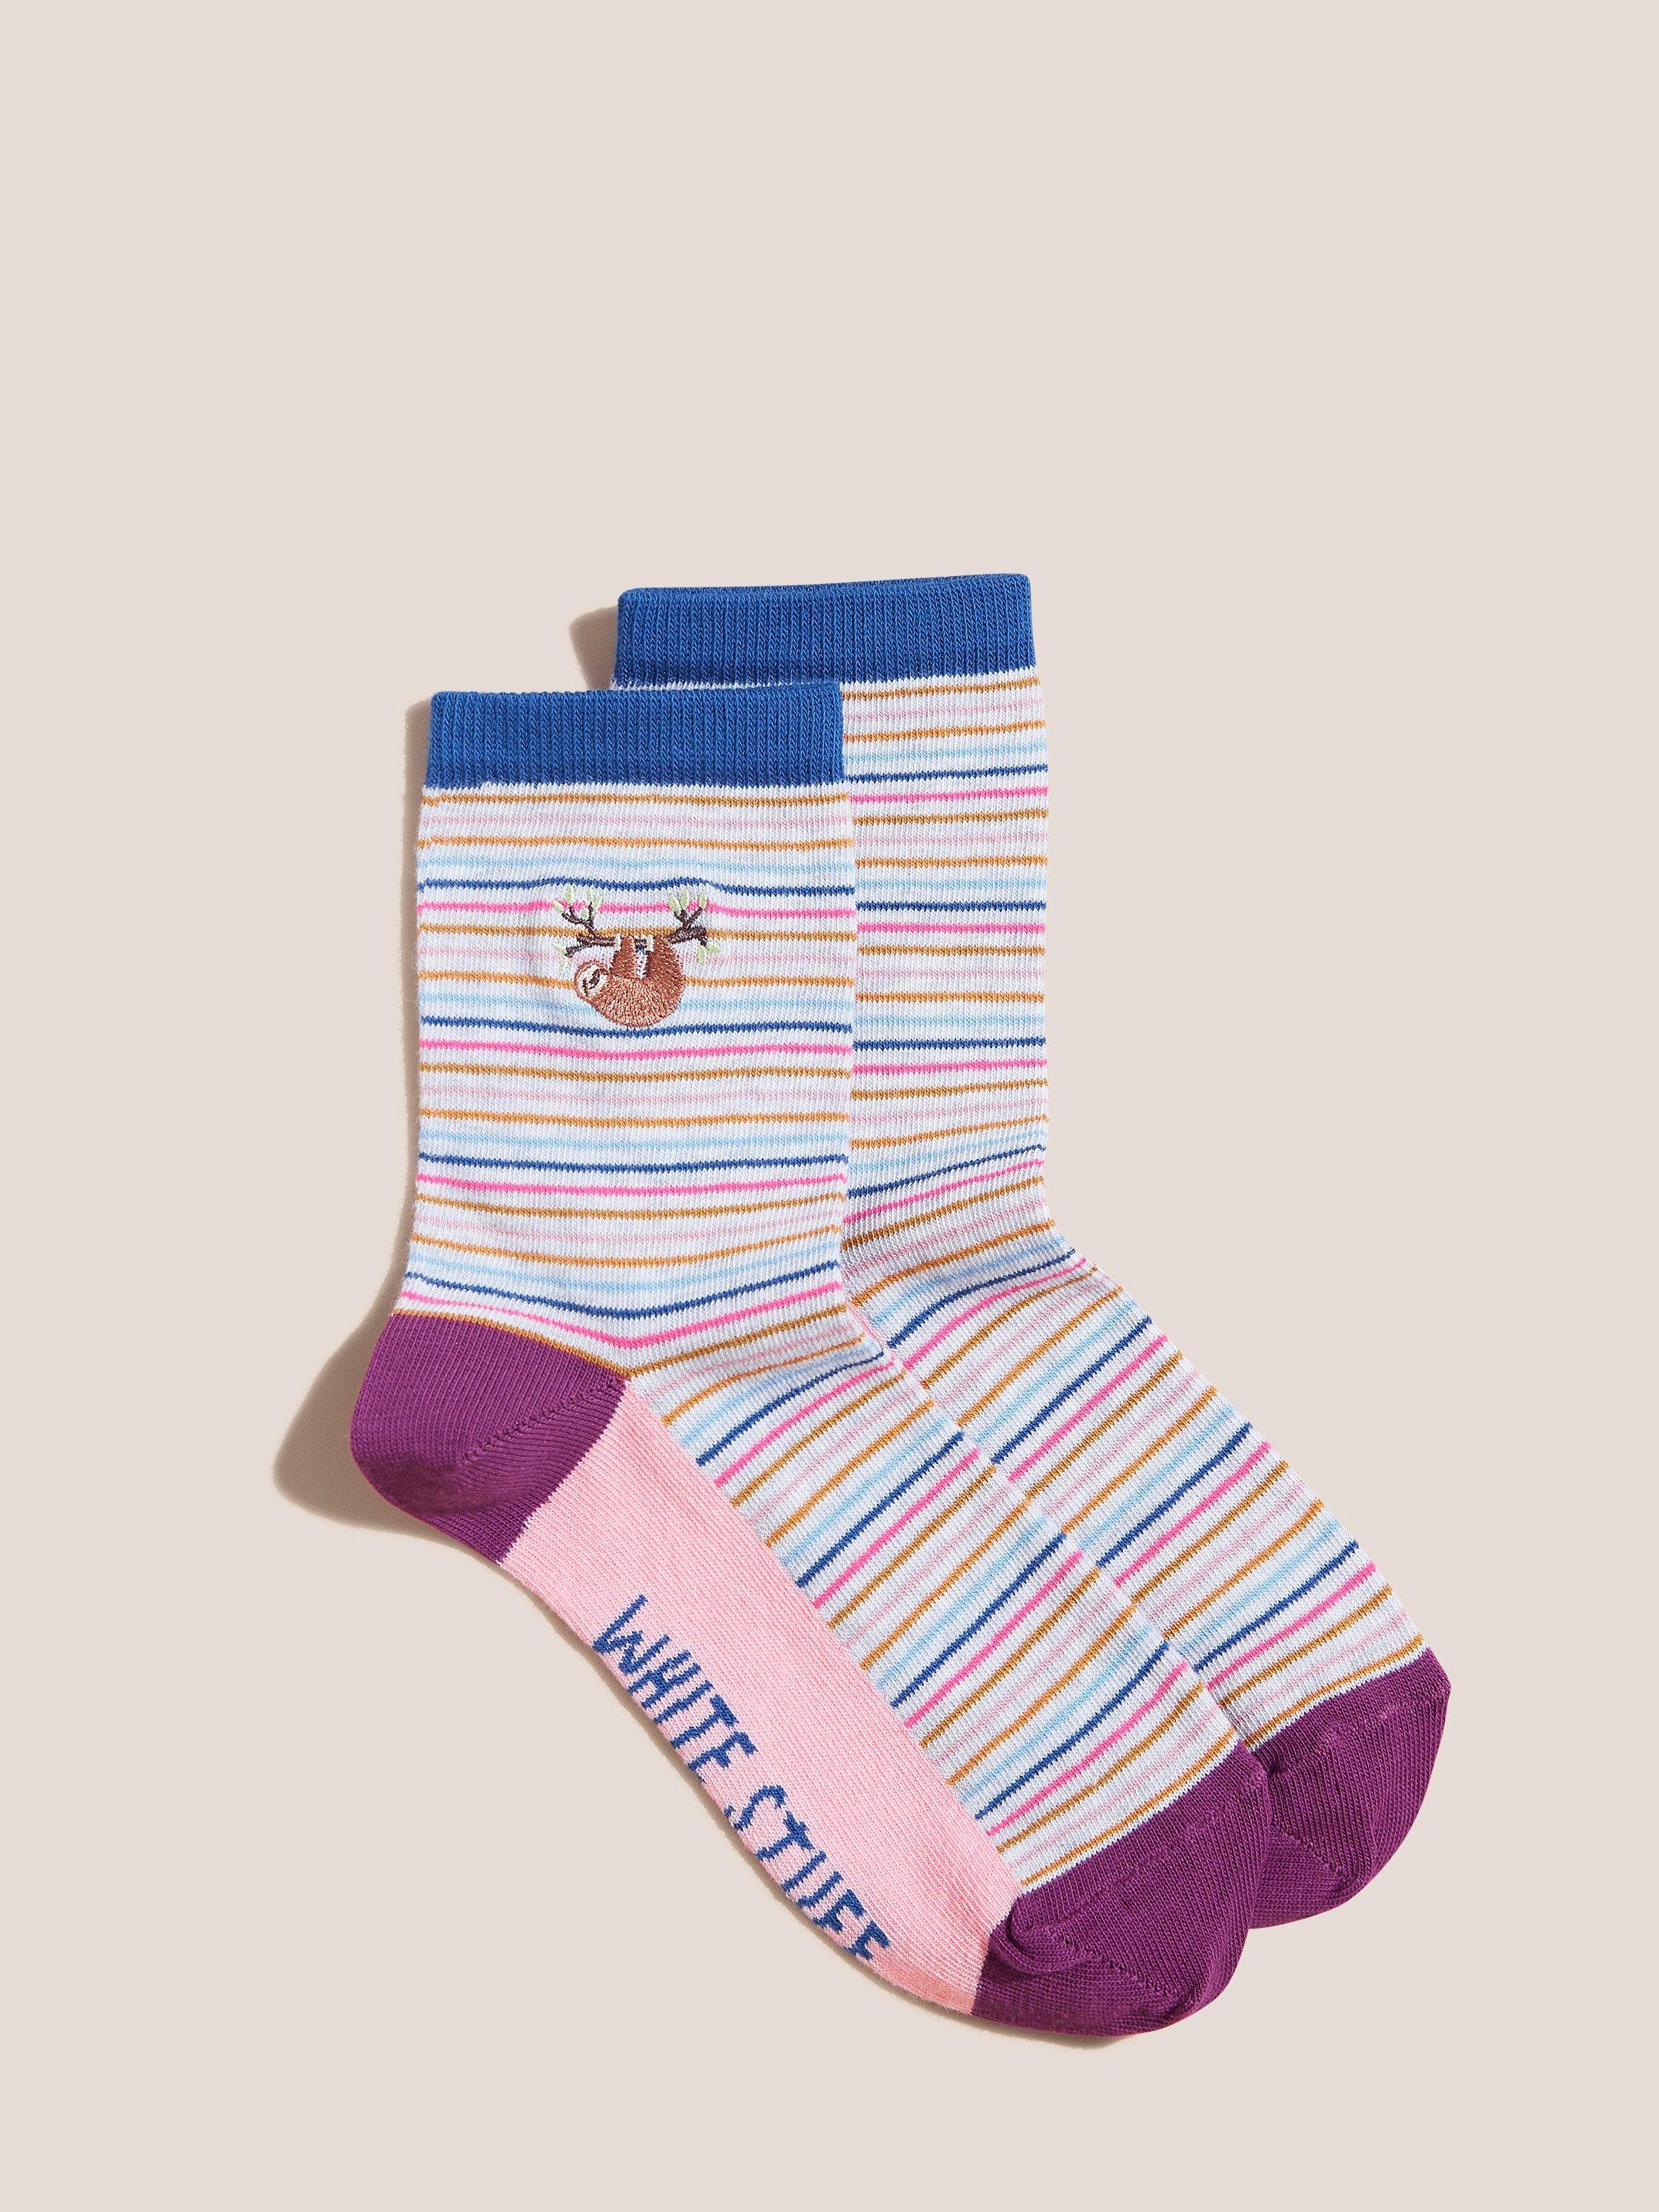 Embroidered Sloth Socks in BLUE MULTI | White Stuff